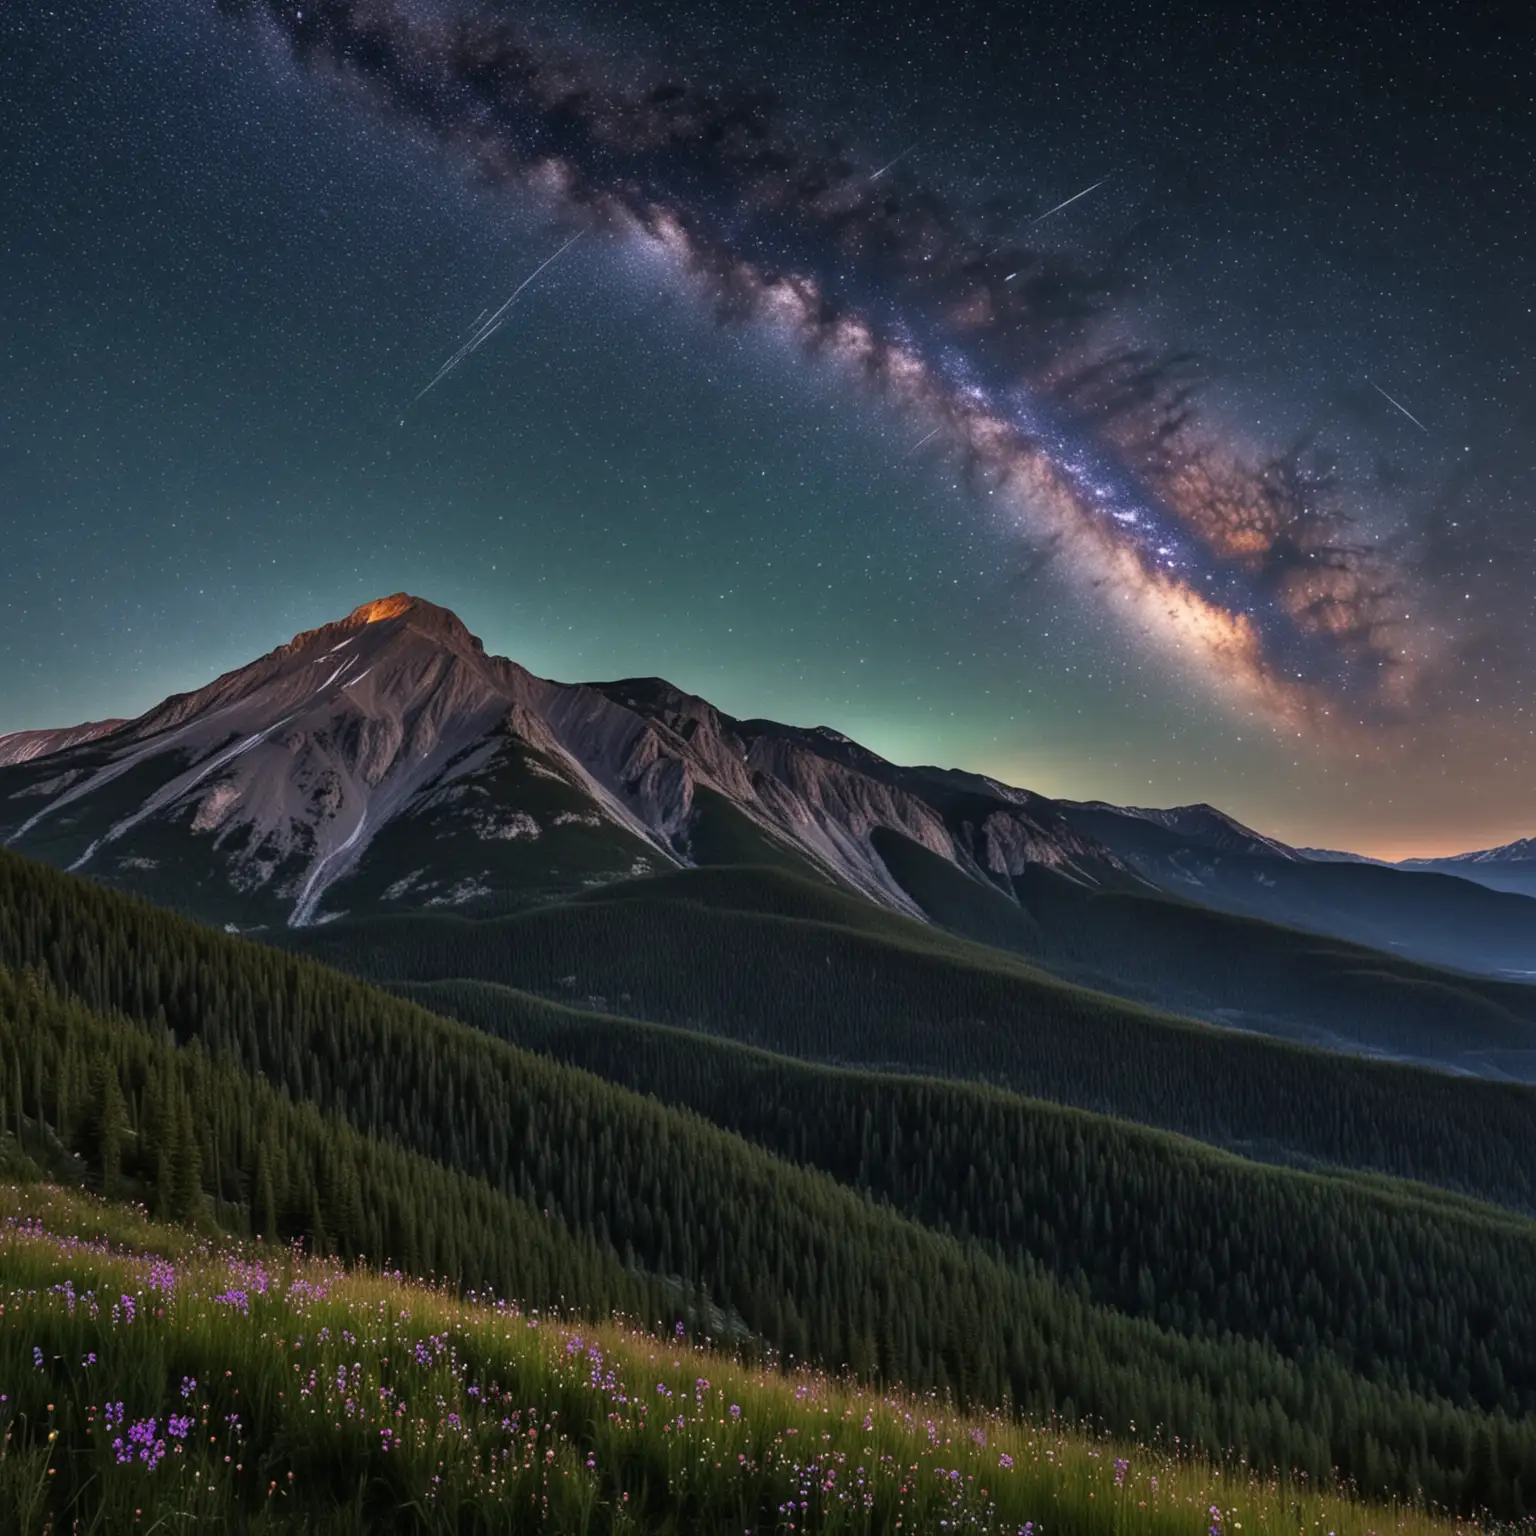 Scenic Mountain View under a Starry Sky with Shooting Stars